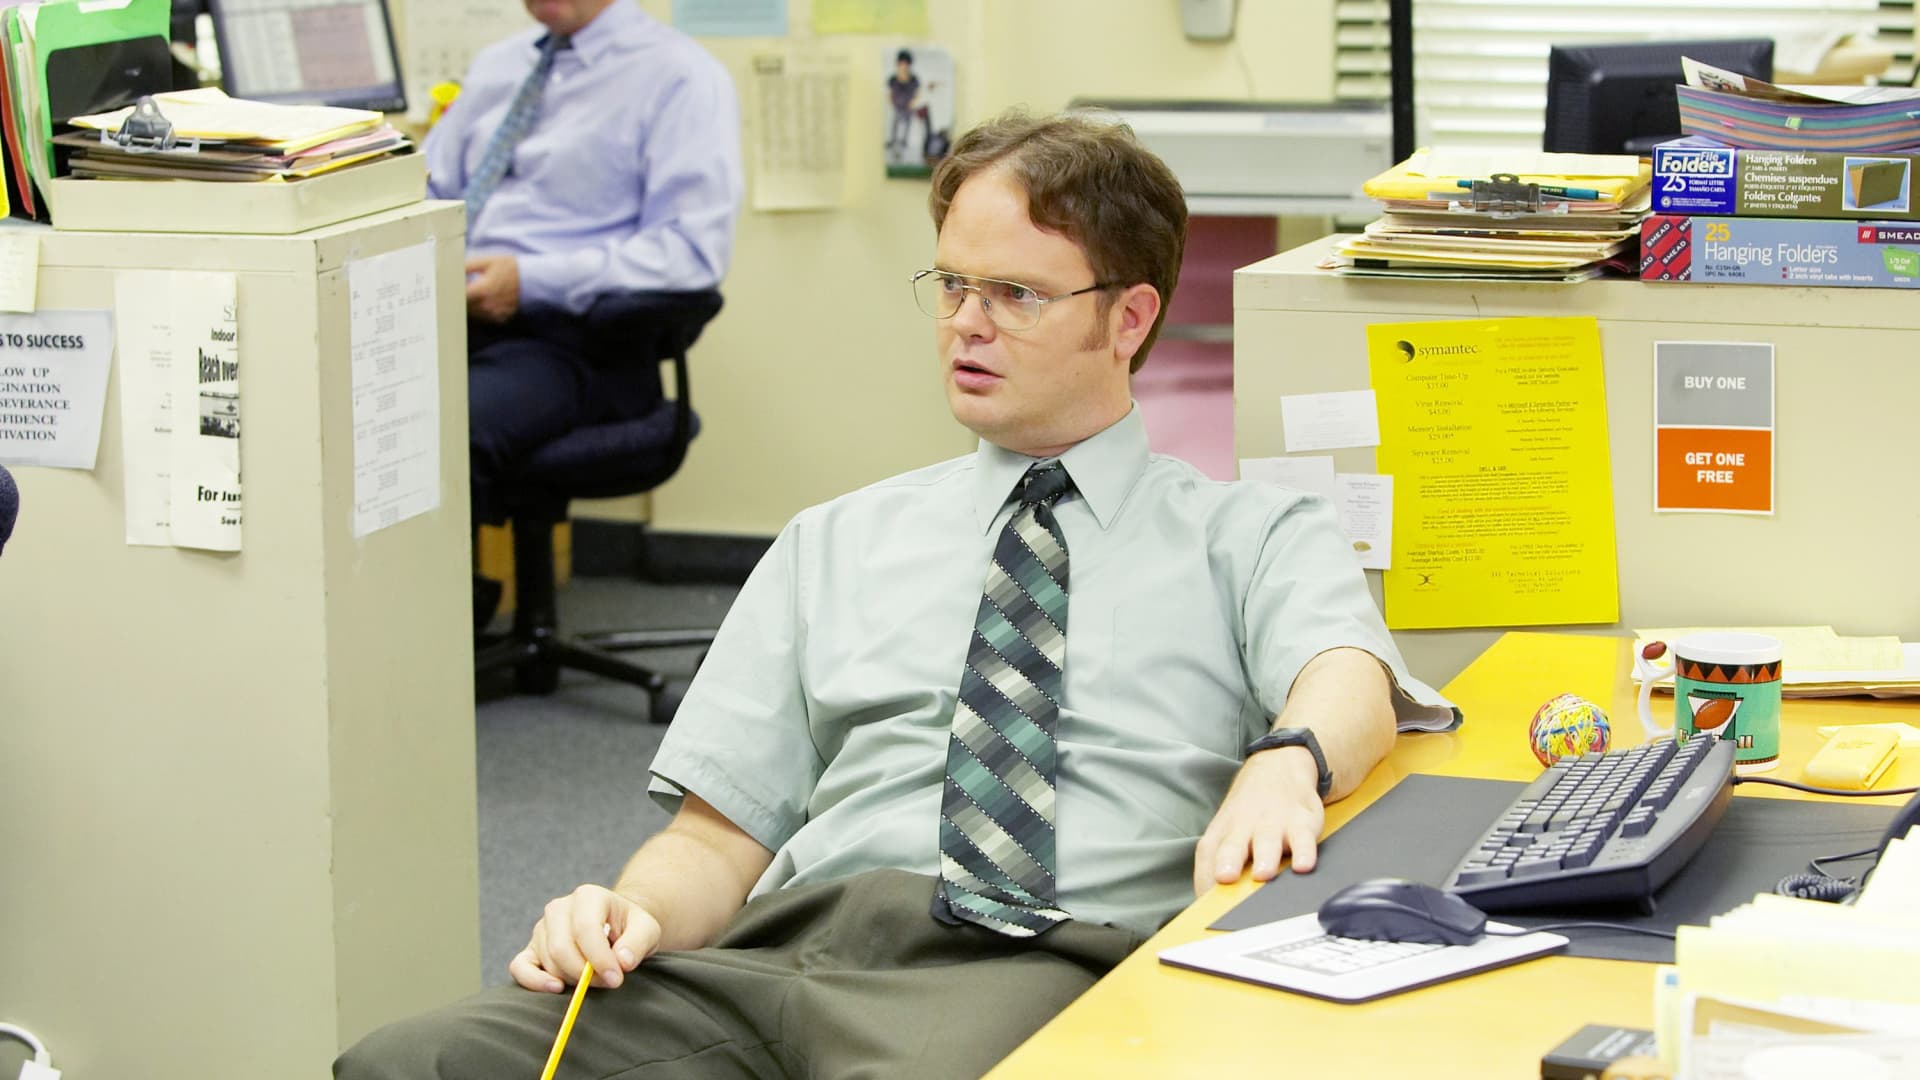 A psychologist says there are 7 types of 'office jerks'—here's how to tell which one you work with